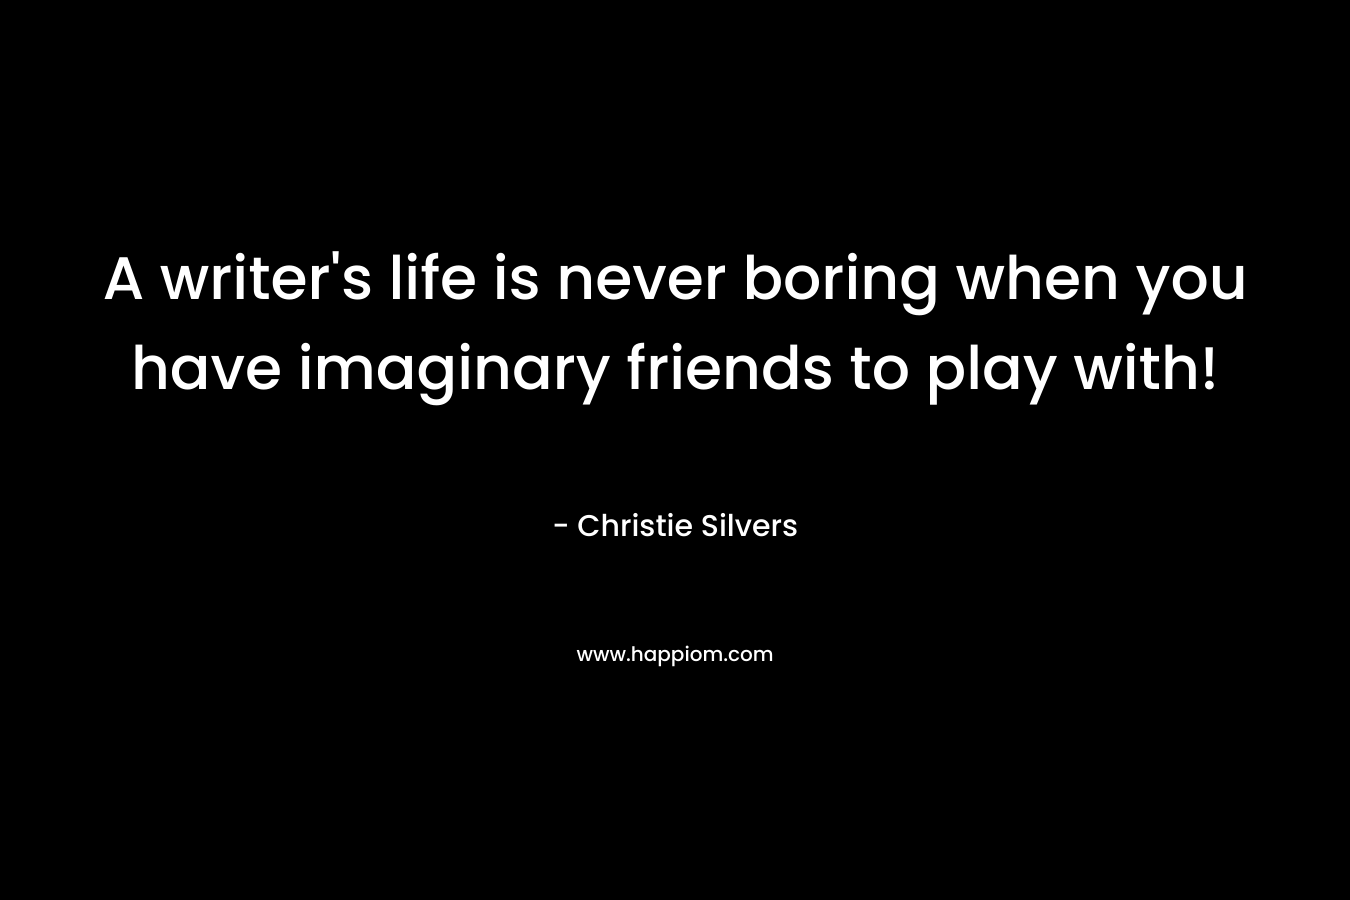 A writer’s life is never boring when you have imaginary friends to play with! – Christie Silvers